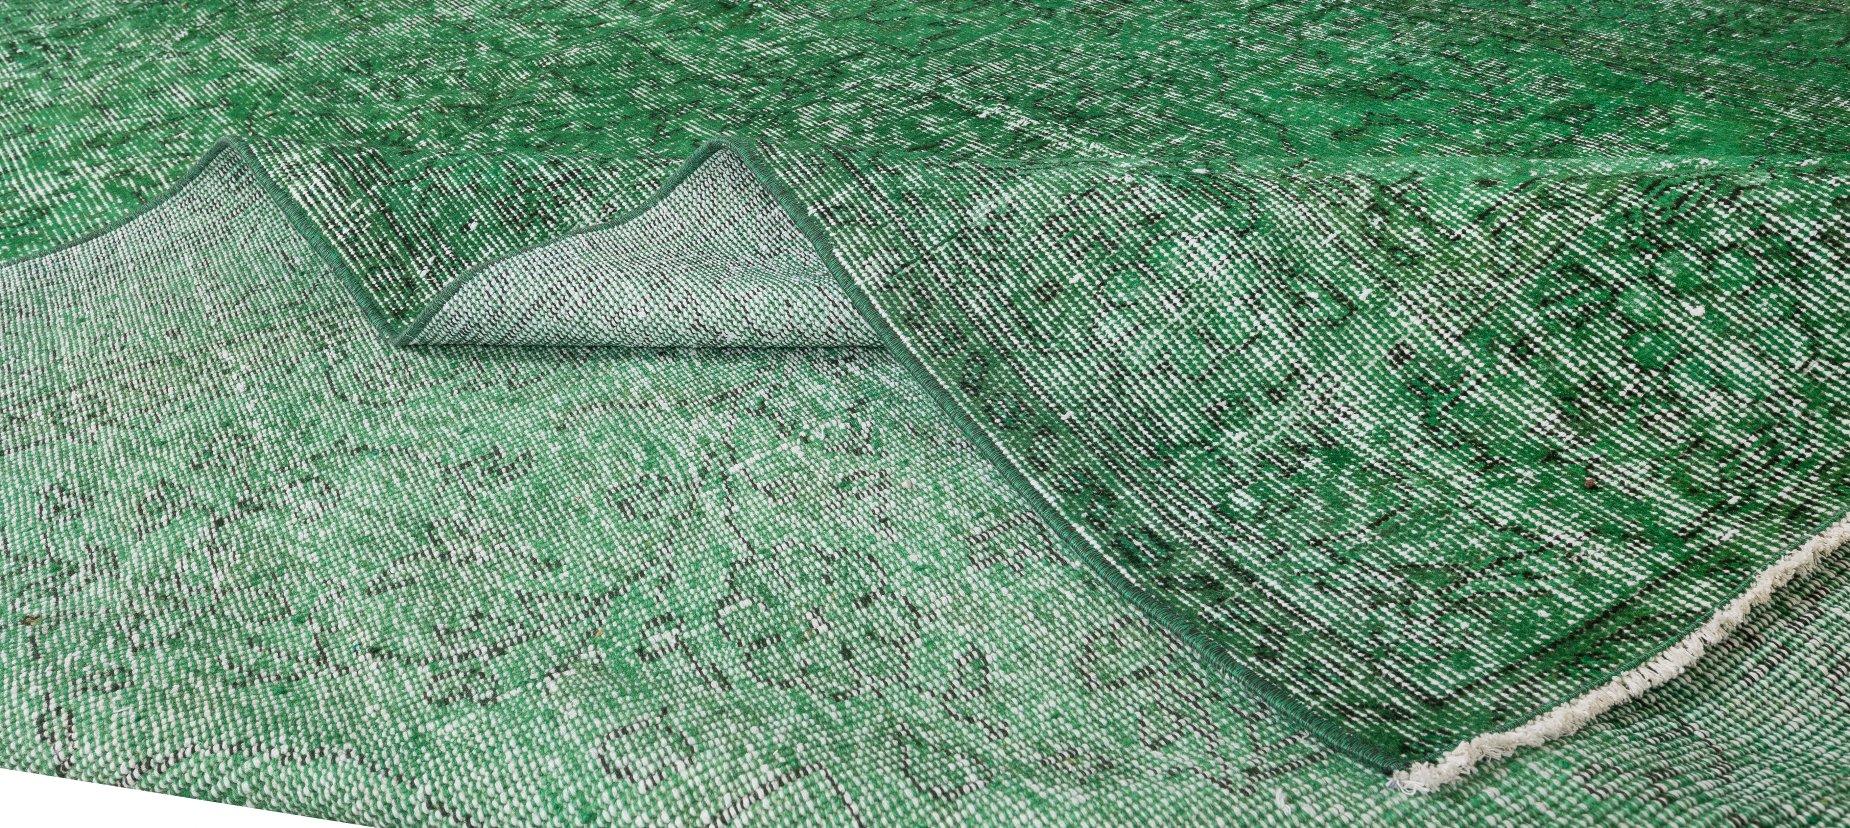 Modern 6.5x10 Ft Vintage Decorative Rug, Hand Made Turkish Wool Carpet Re-Dyed in Green For Sale